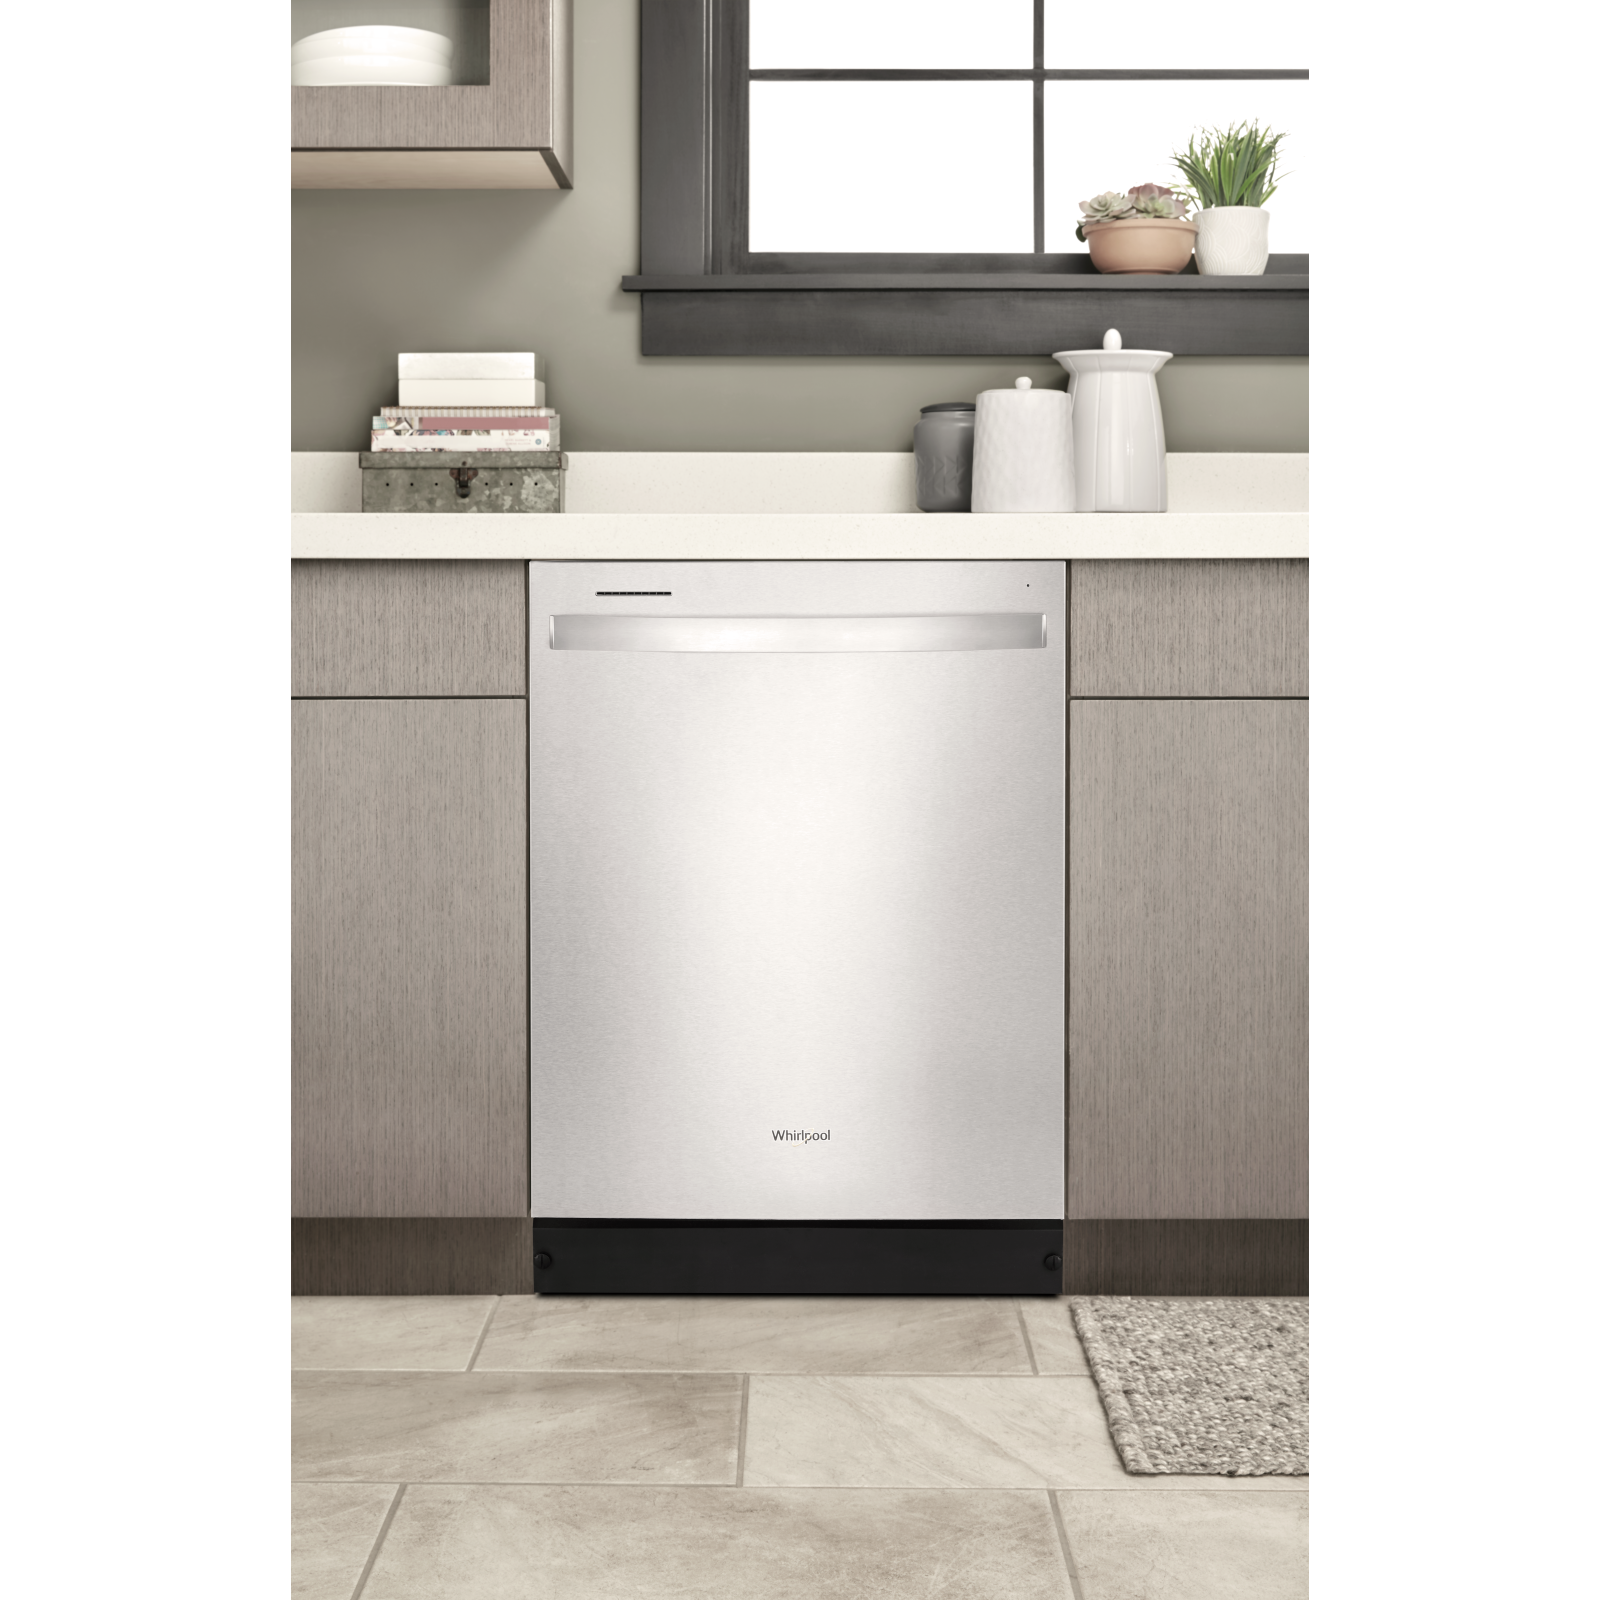 Whirlpool - 55 dBA Built In Dishwasher in Stainless - WDT540HAMZ